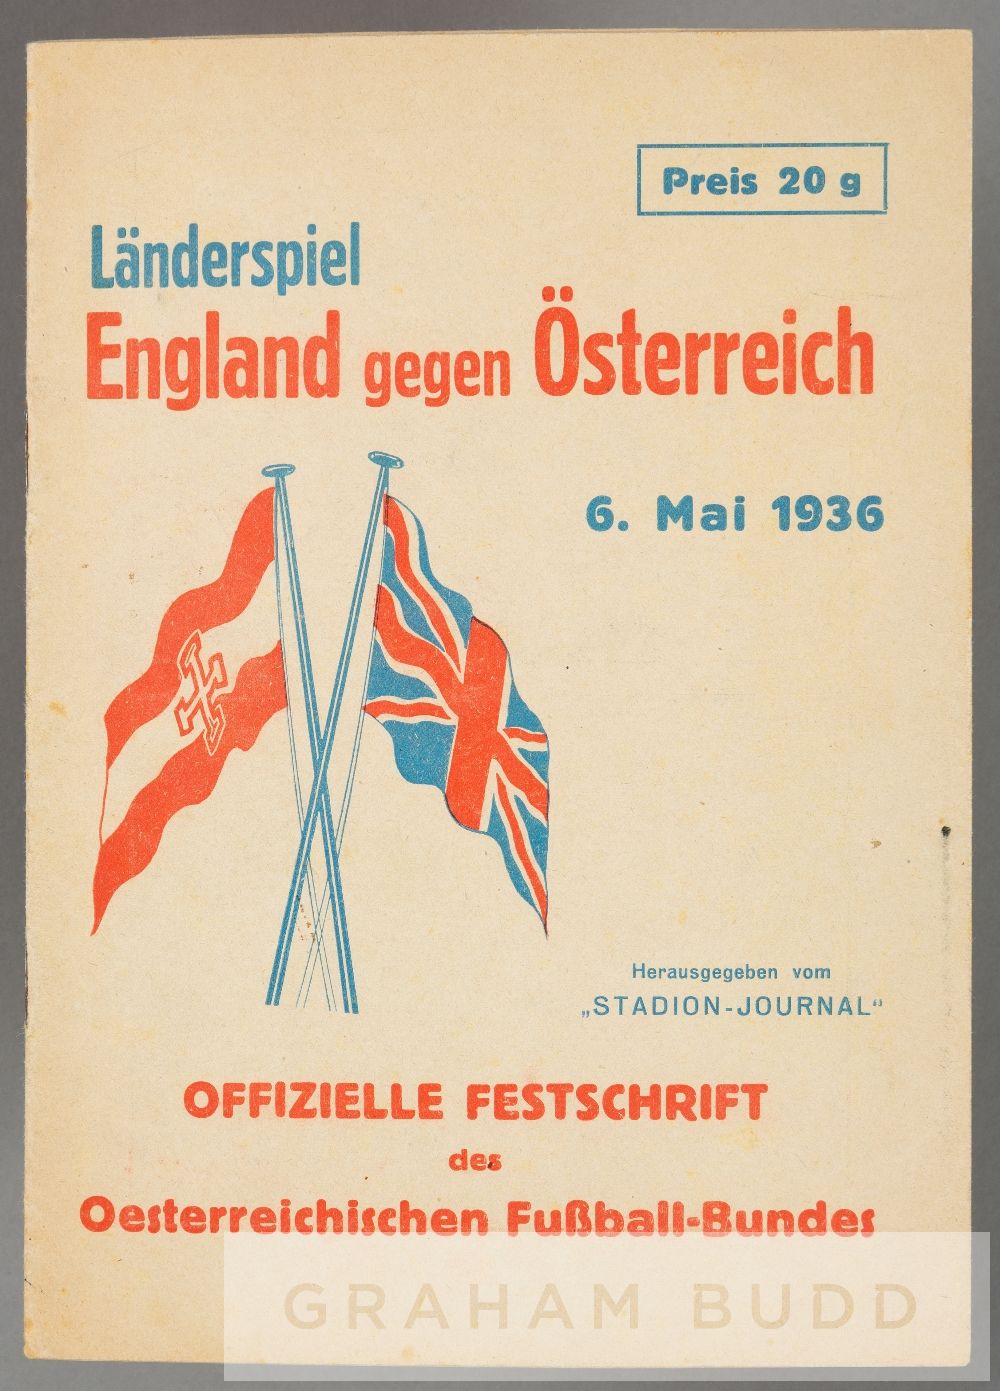 Austria v England international programme played in Vienna 6th May 1936, 16 pages with stiff outer